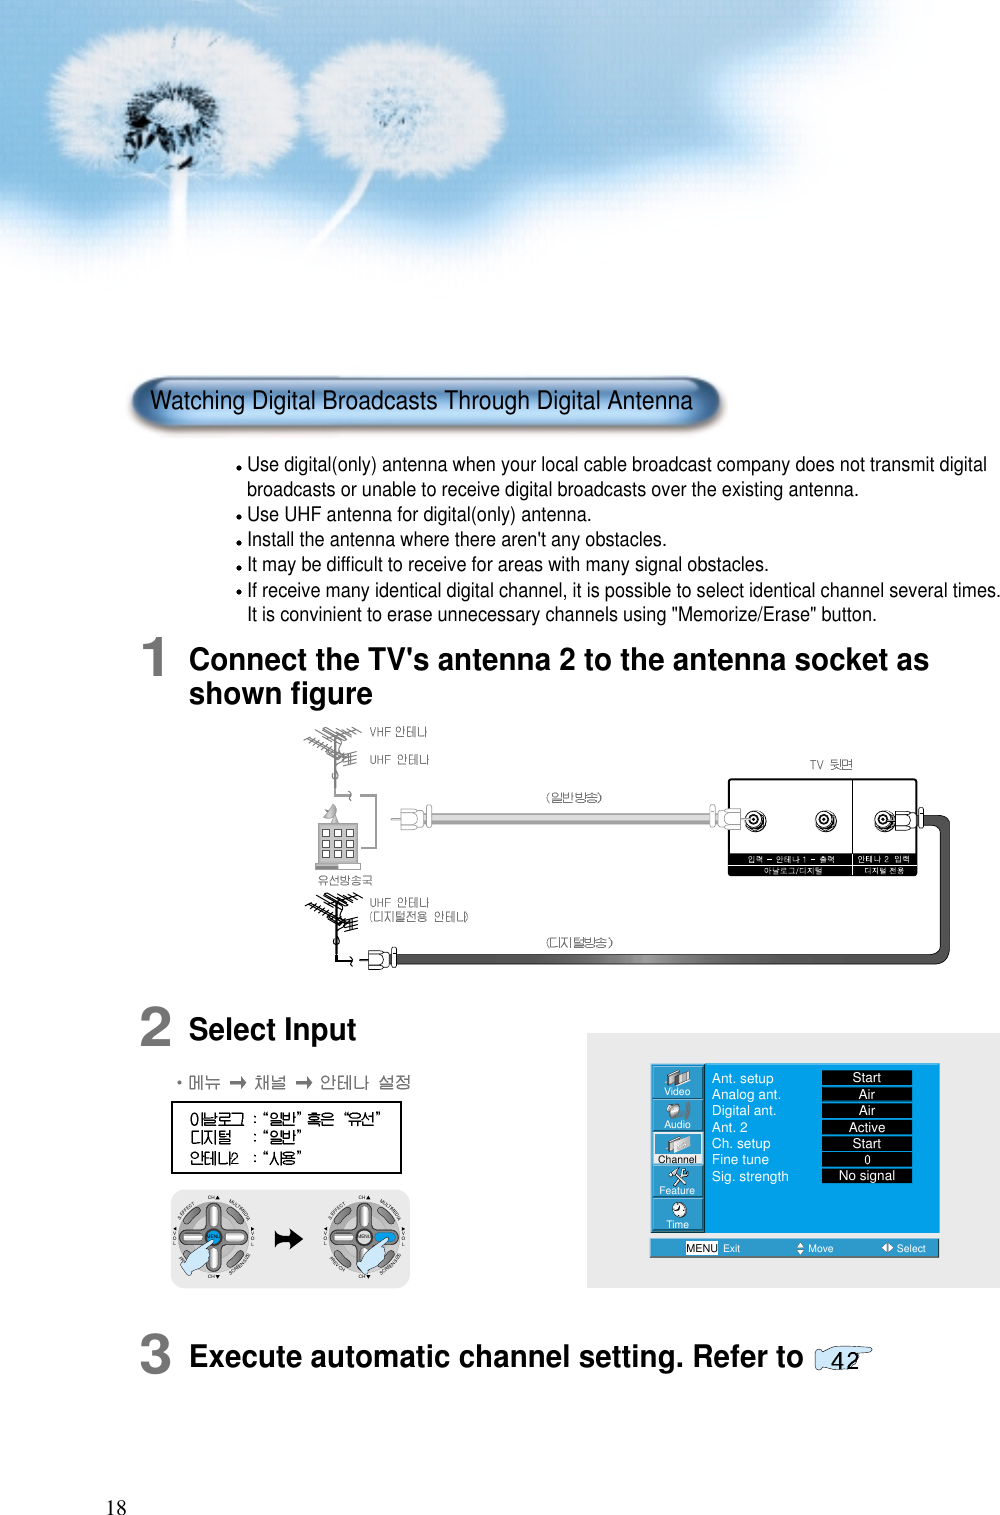 182Select Input1Connect the TV&apos;s antenna 2 to the antenna socket asshown ﬁgureUse digital(only) antenna when your local cable broadcast company does not transmit digitalbroadcasts or unable to receive digital broadcasts over the existing antenna.Use UHF antenna for digital(only) antenna.Install the antenna where there aren&apos;t any obstacles.It may be difﬁcult to receive for areas with many signal obstacles.If receive many identical digital channel, it is possible to select identical channel several times.It is convinient to erase unnecessary channels using &quot;Memorize/Erase&quot; button.VideoChannelMENUAudioFeatureTimeExit Move SelectAnt. setupAnalog ant.Digital ant.Ant. 2Ch. setupFine tuneSig. strengthStartAirAirActiveStartNo signal3Execute automatic channel setting. Refer to Watching Digital Broadcasts Through Digital AntennaCHCHVOLVOLMULTIMEDIAS.EFFECTMENUPREVCHSCREENSIZECHCHVOLVOLMULTIMEDIAS.EFFECTMENUPREVCHSCREENSIZE